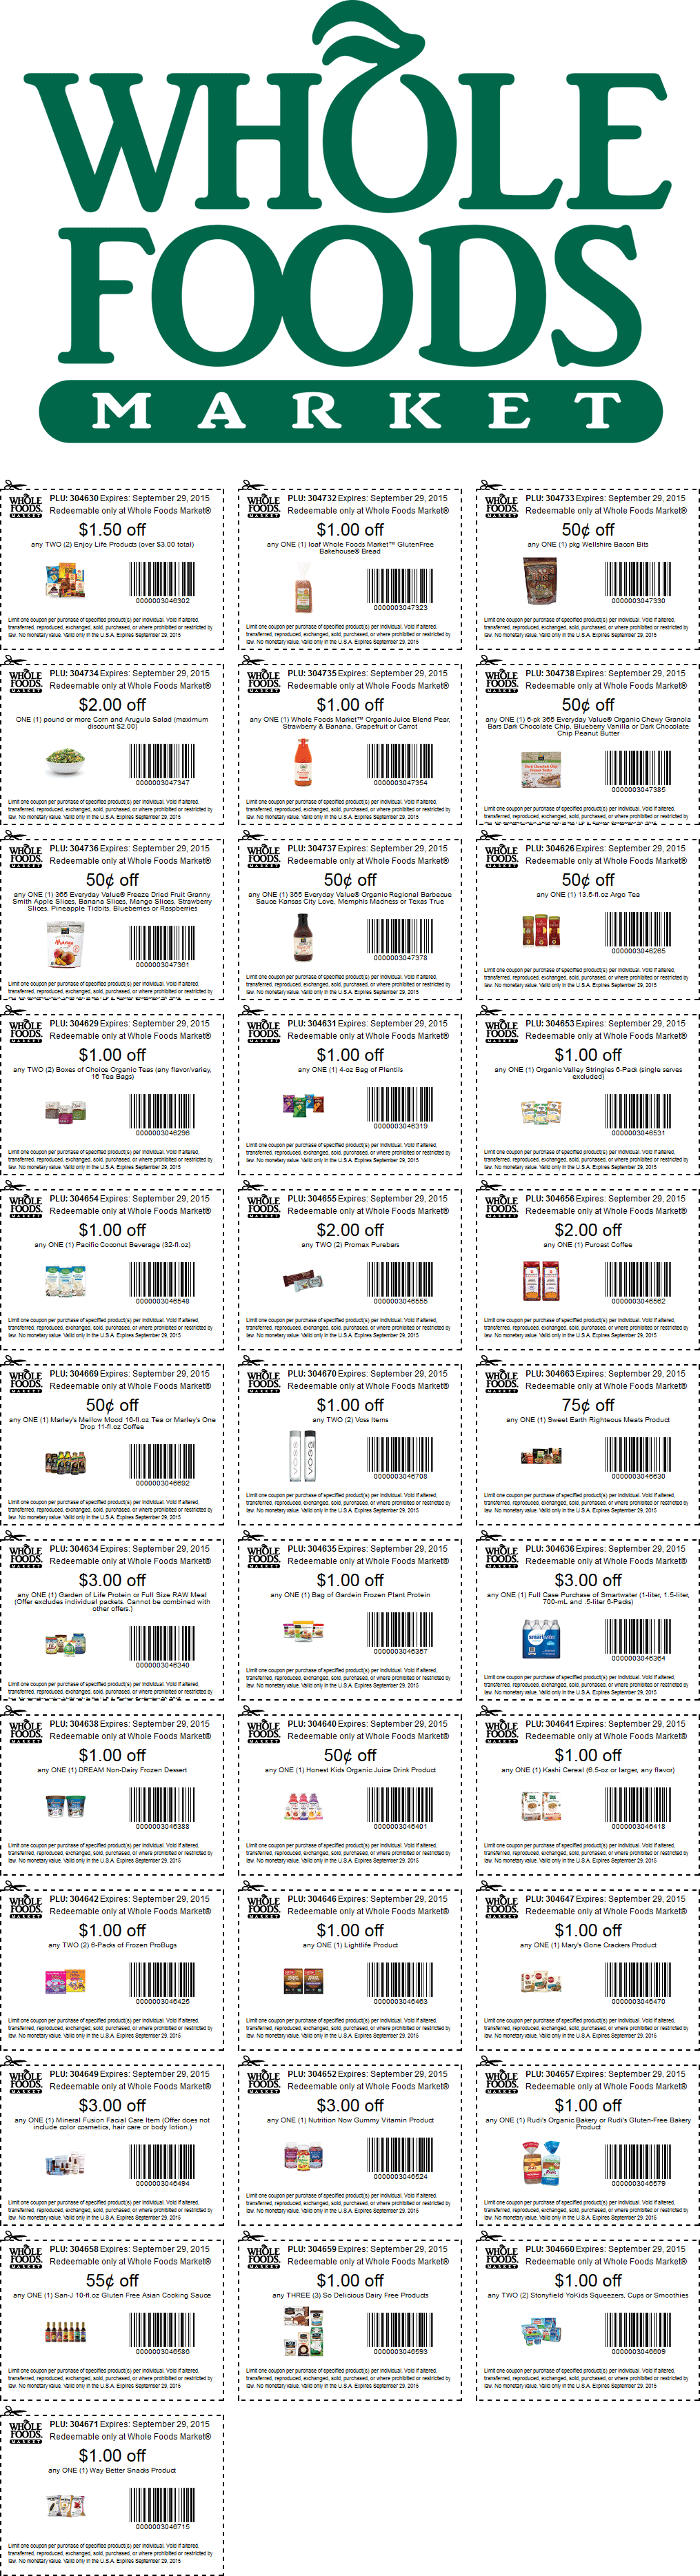 Whole Foods Coupons Various Grocery Coupons For Whole 